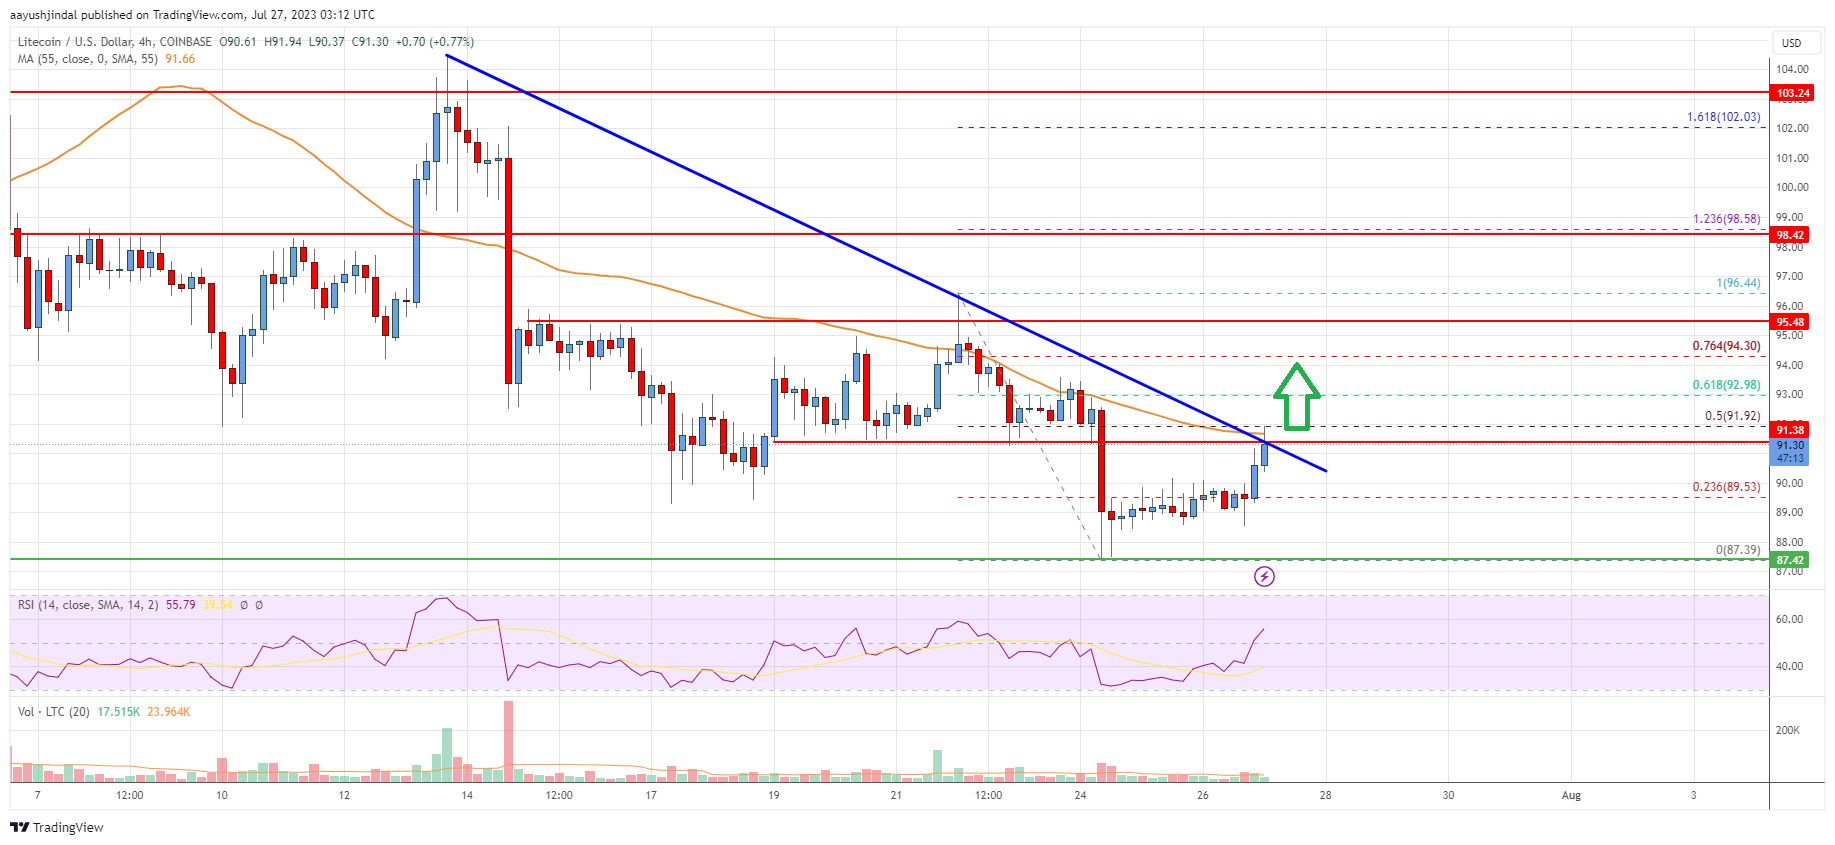 Litecoin (LTC) Price Analysis: Fresh Increase Possible Above This Resistance